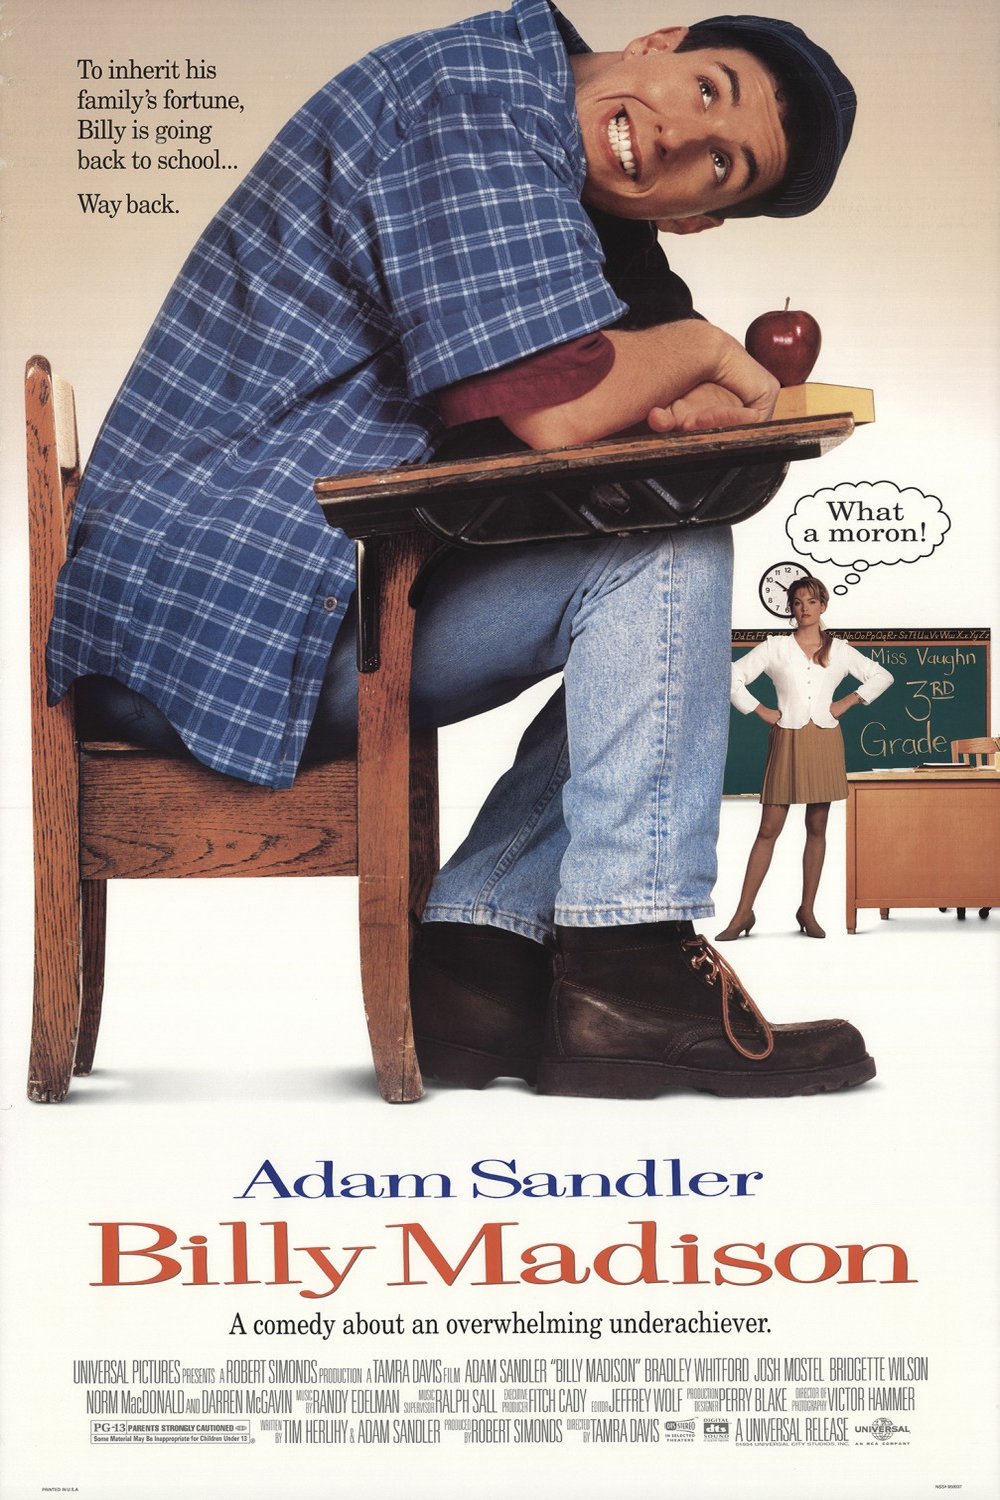 Poster of the movie Billy Madison